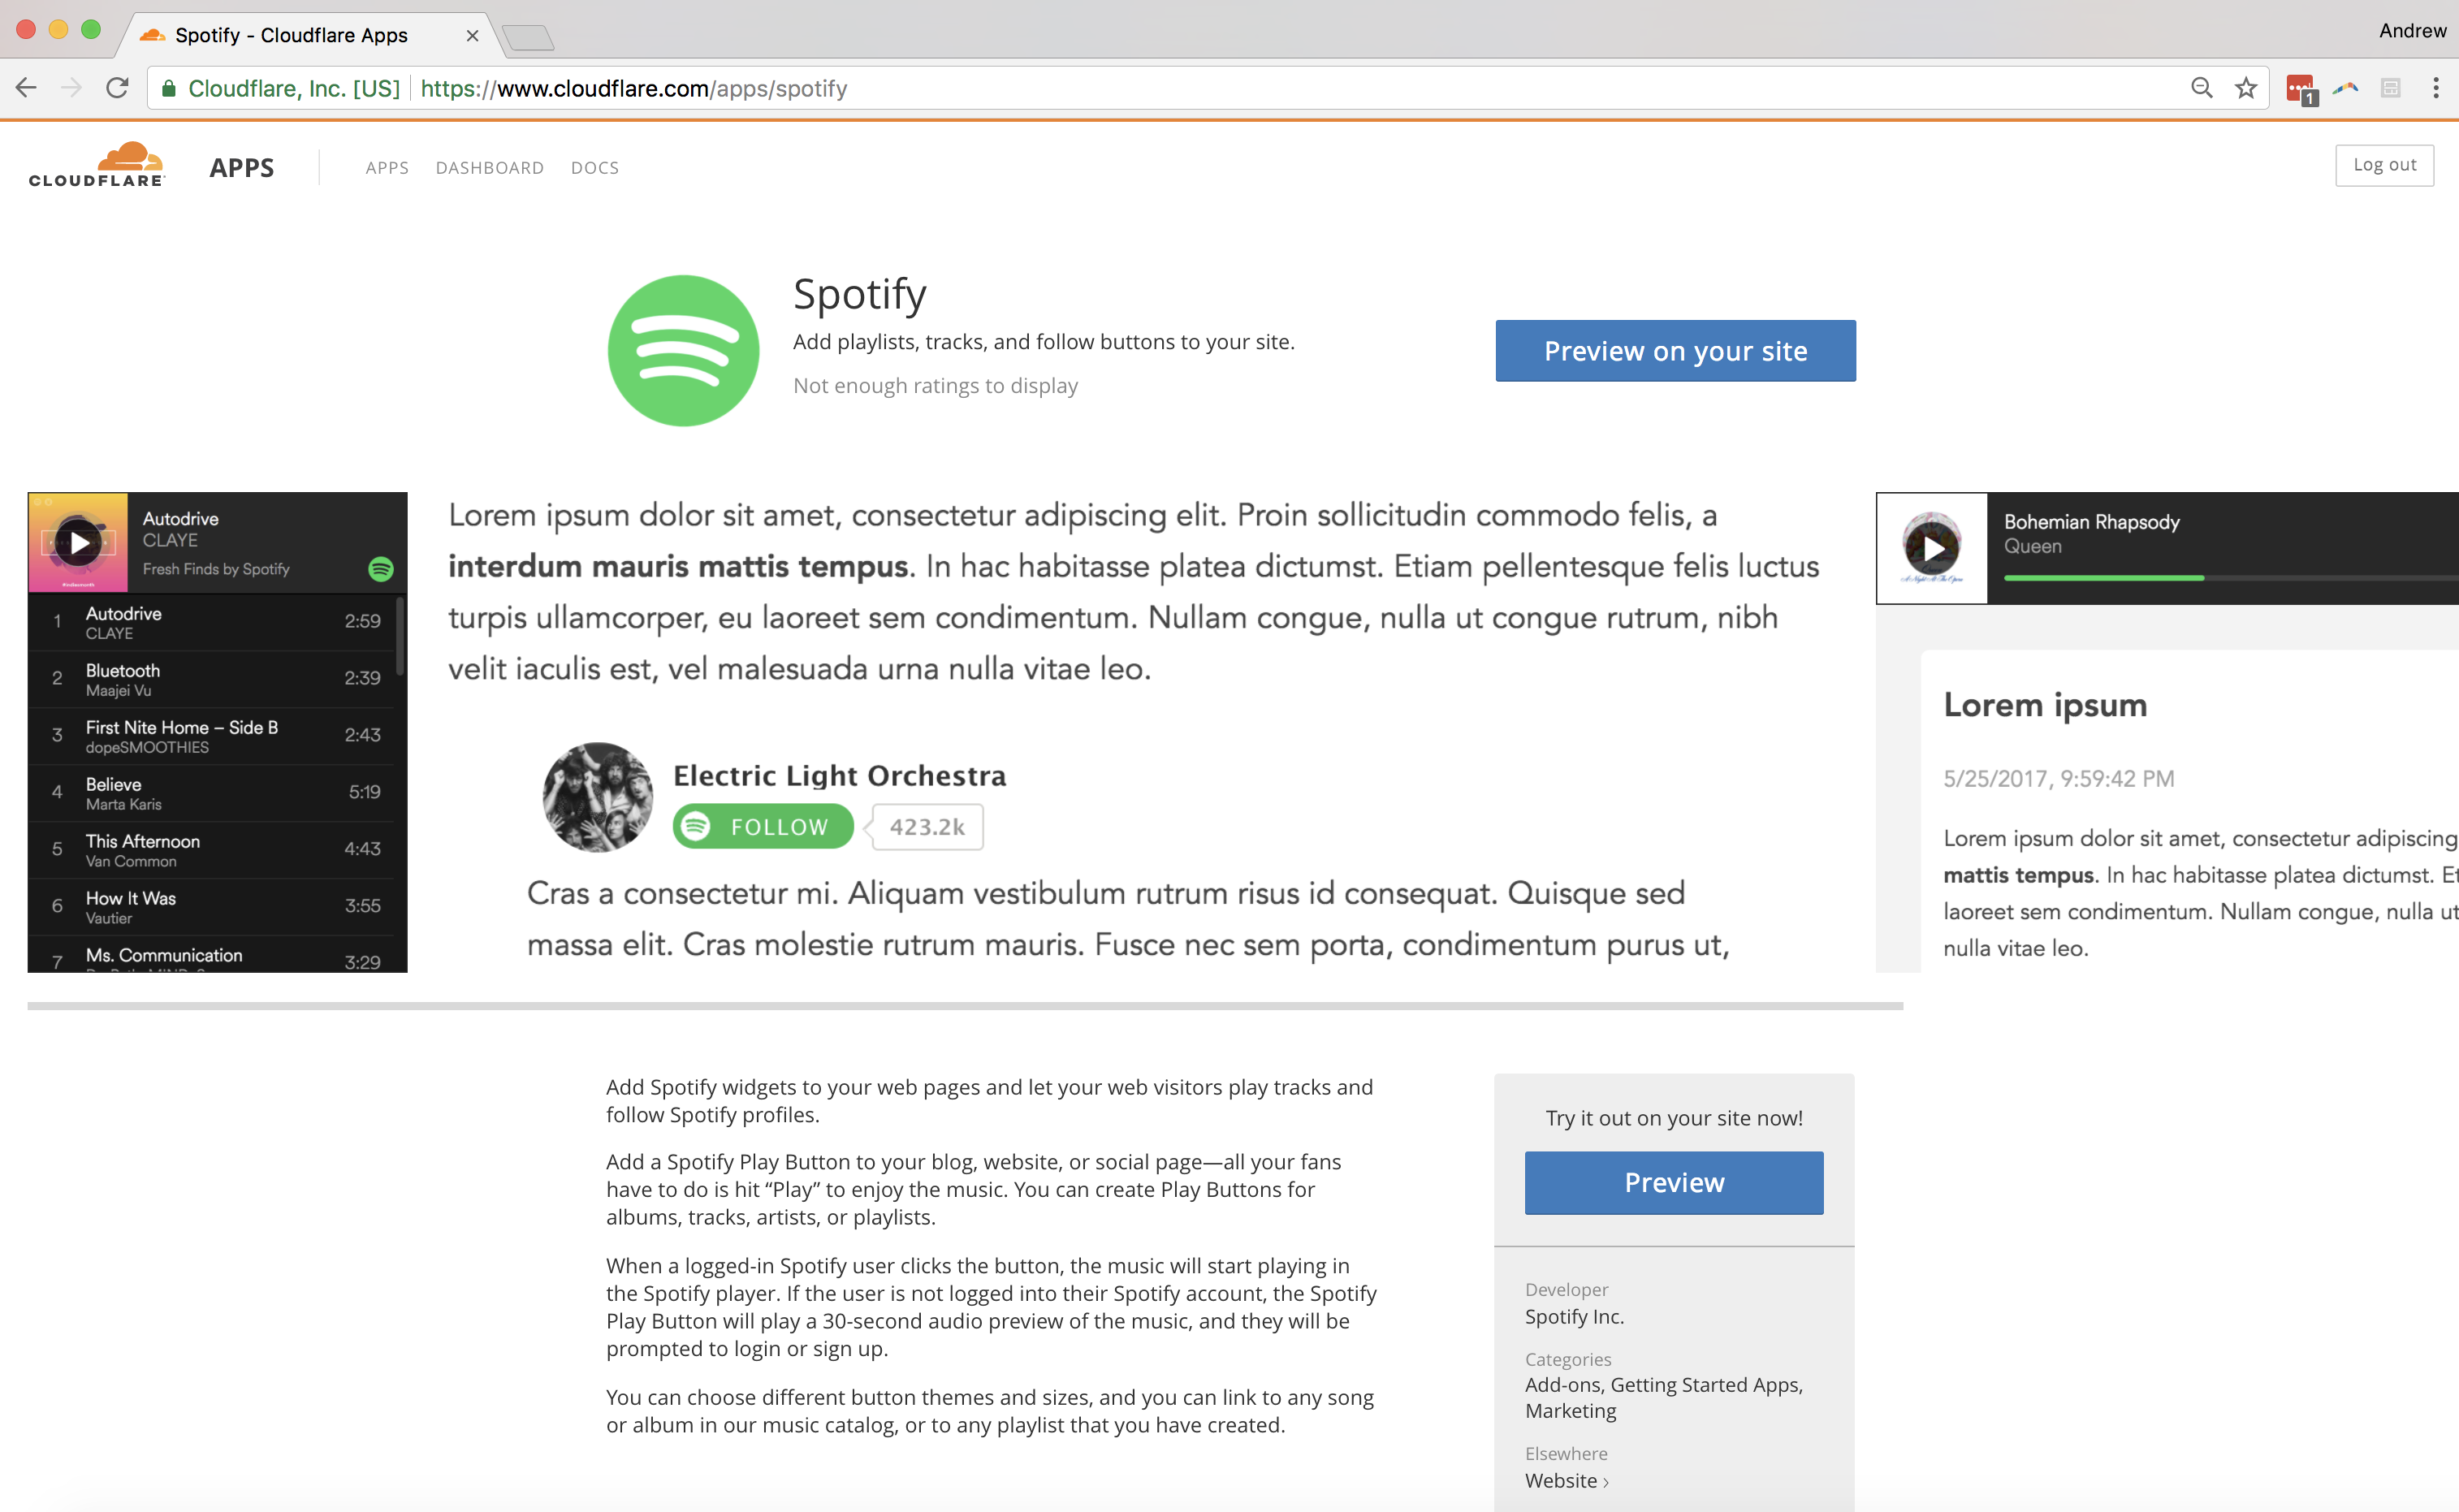 Spotify app description page in Cloudflare Apps